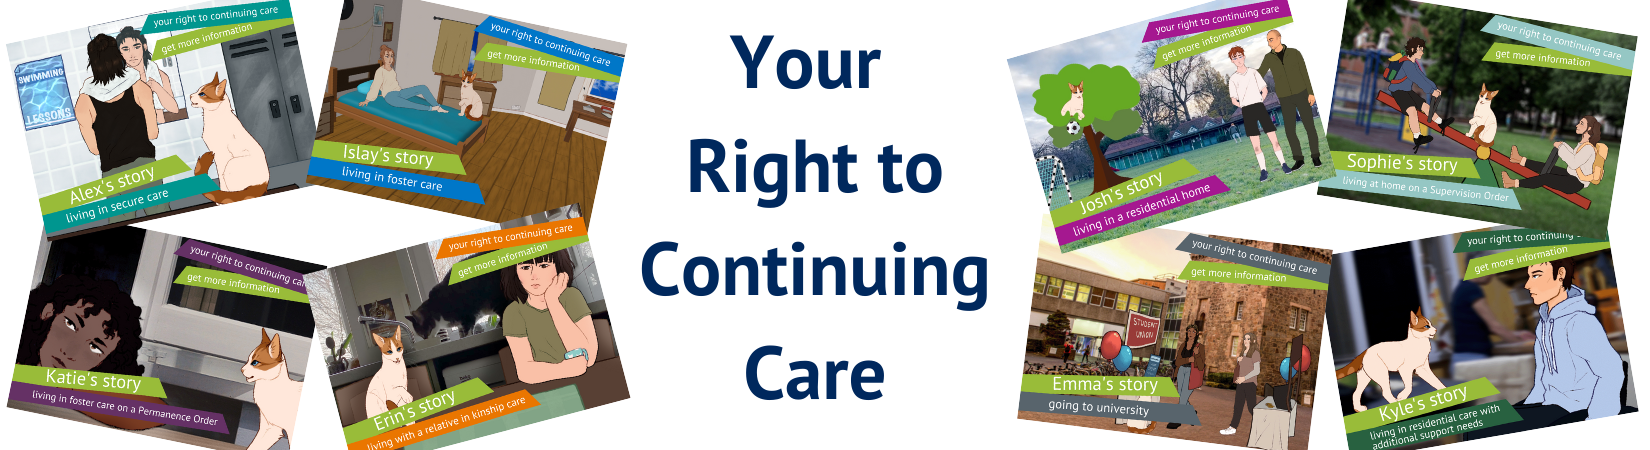 Your rights to continuing care